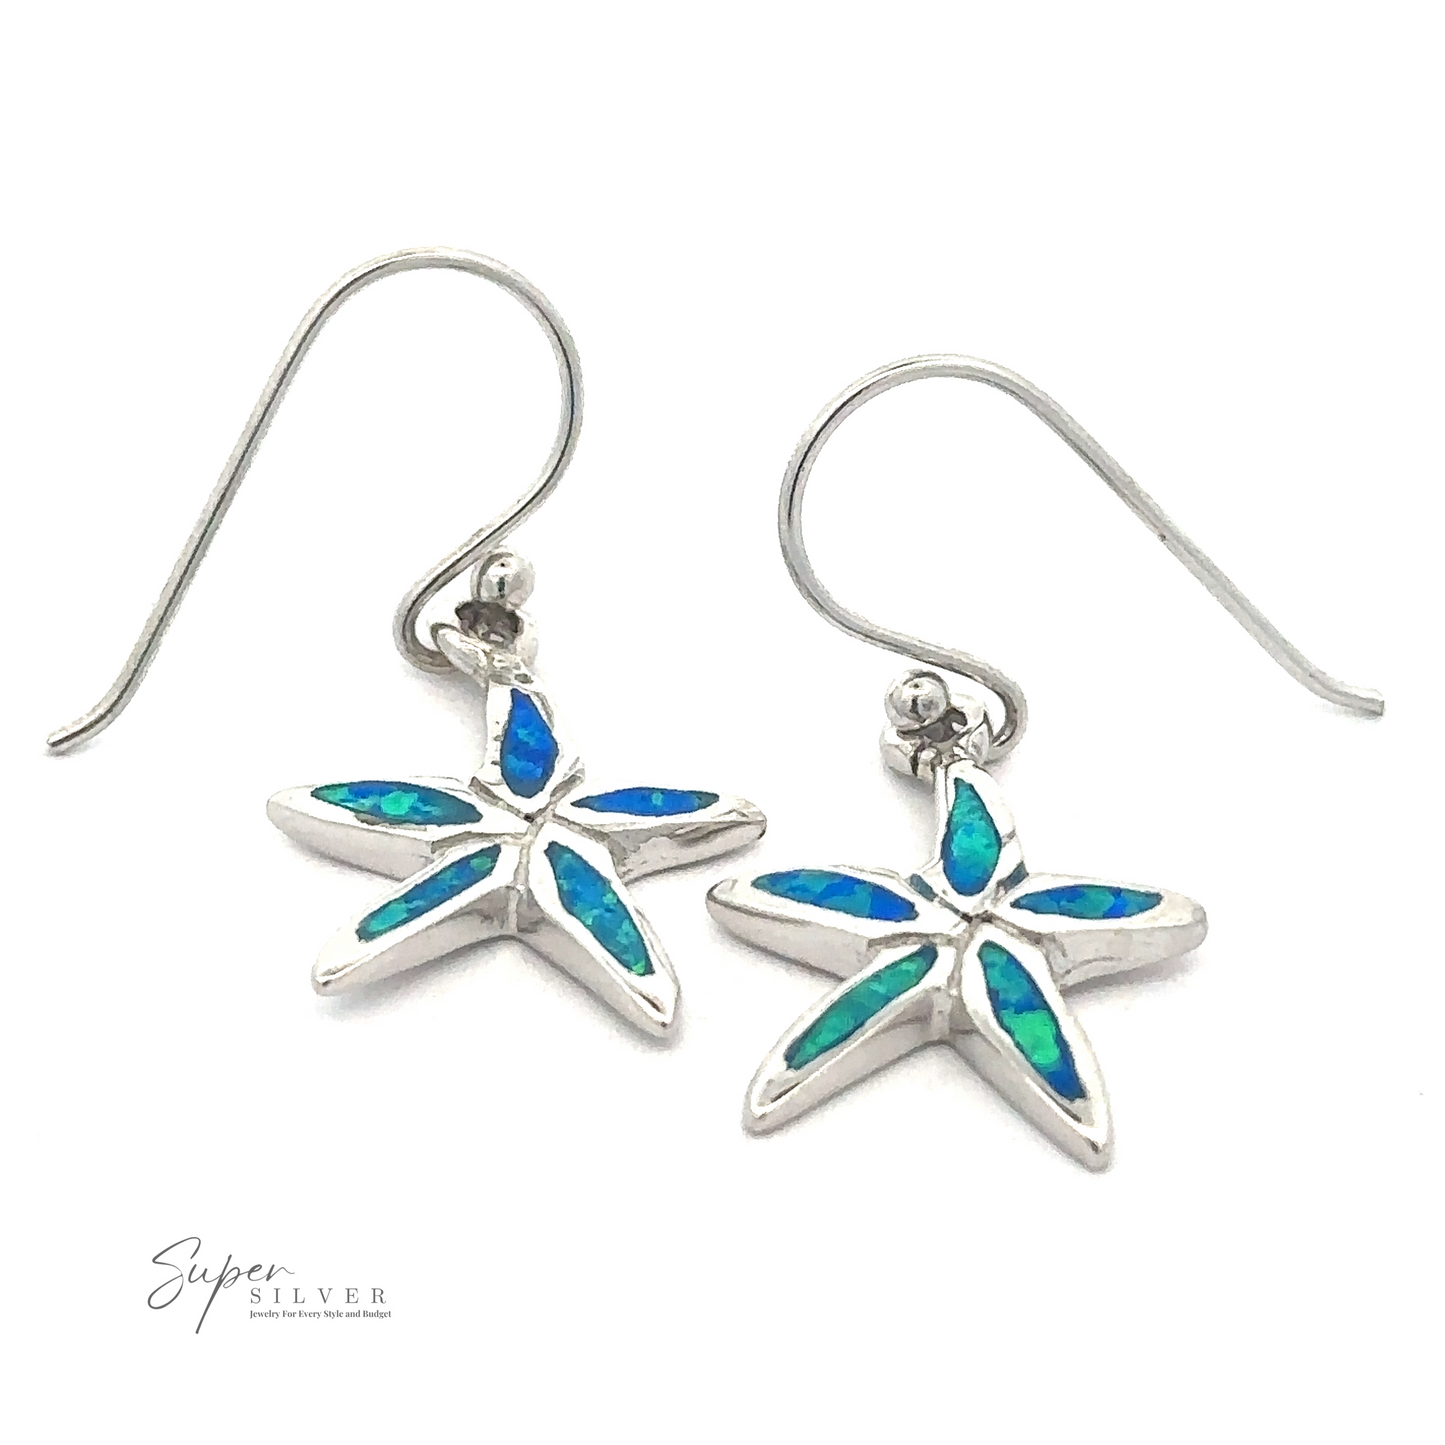 A pair of Lab-Created Opal Star Fish Earrings with dazzling blue and green inlays. The earrings have hook-style fastenings, and the brand "Super Silver" is subtly visible in the bottom left corner.